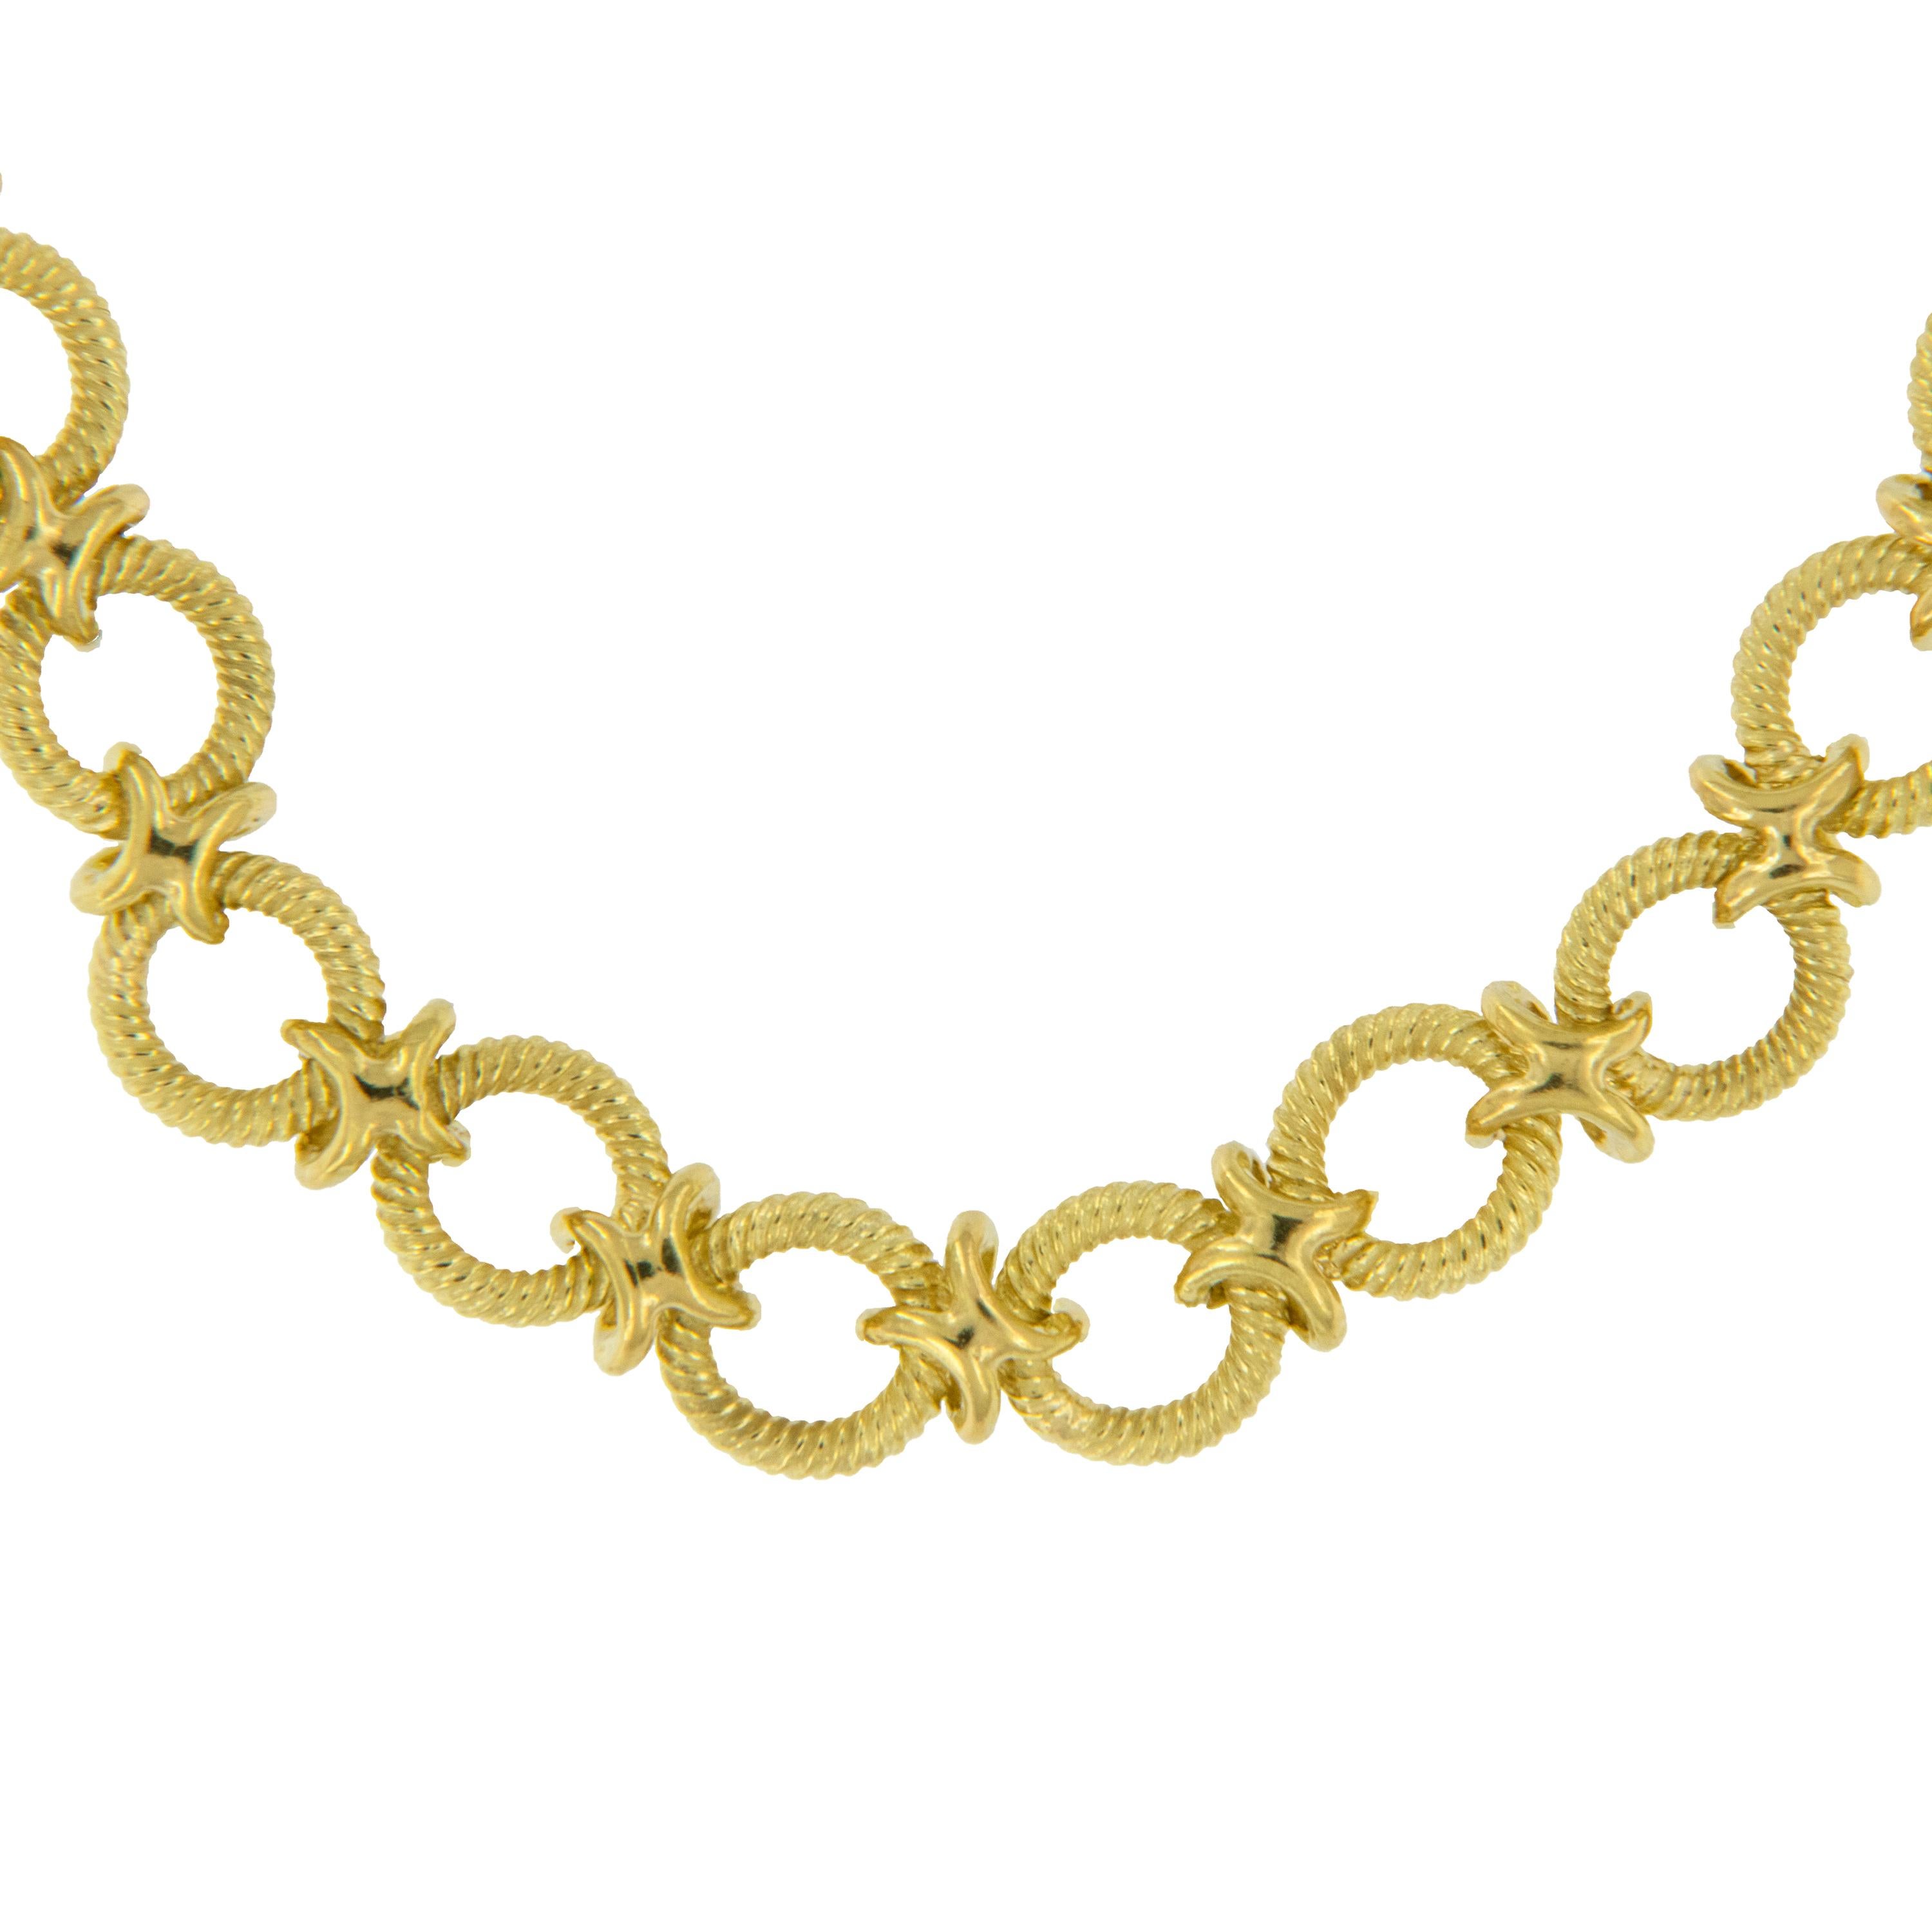 Beautiful handcrafted Italian 18k gold ribbed round chain necklace with a secure lobster clasp looks perfect on it's own and also fabulous layered with other pieces! Necklace is 18 inches long x 5mm wide. Complimentary signature wrapping &